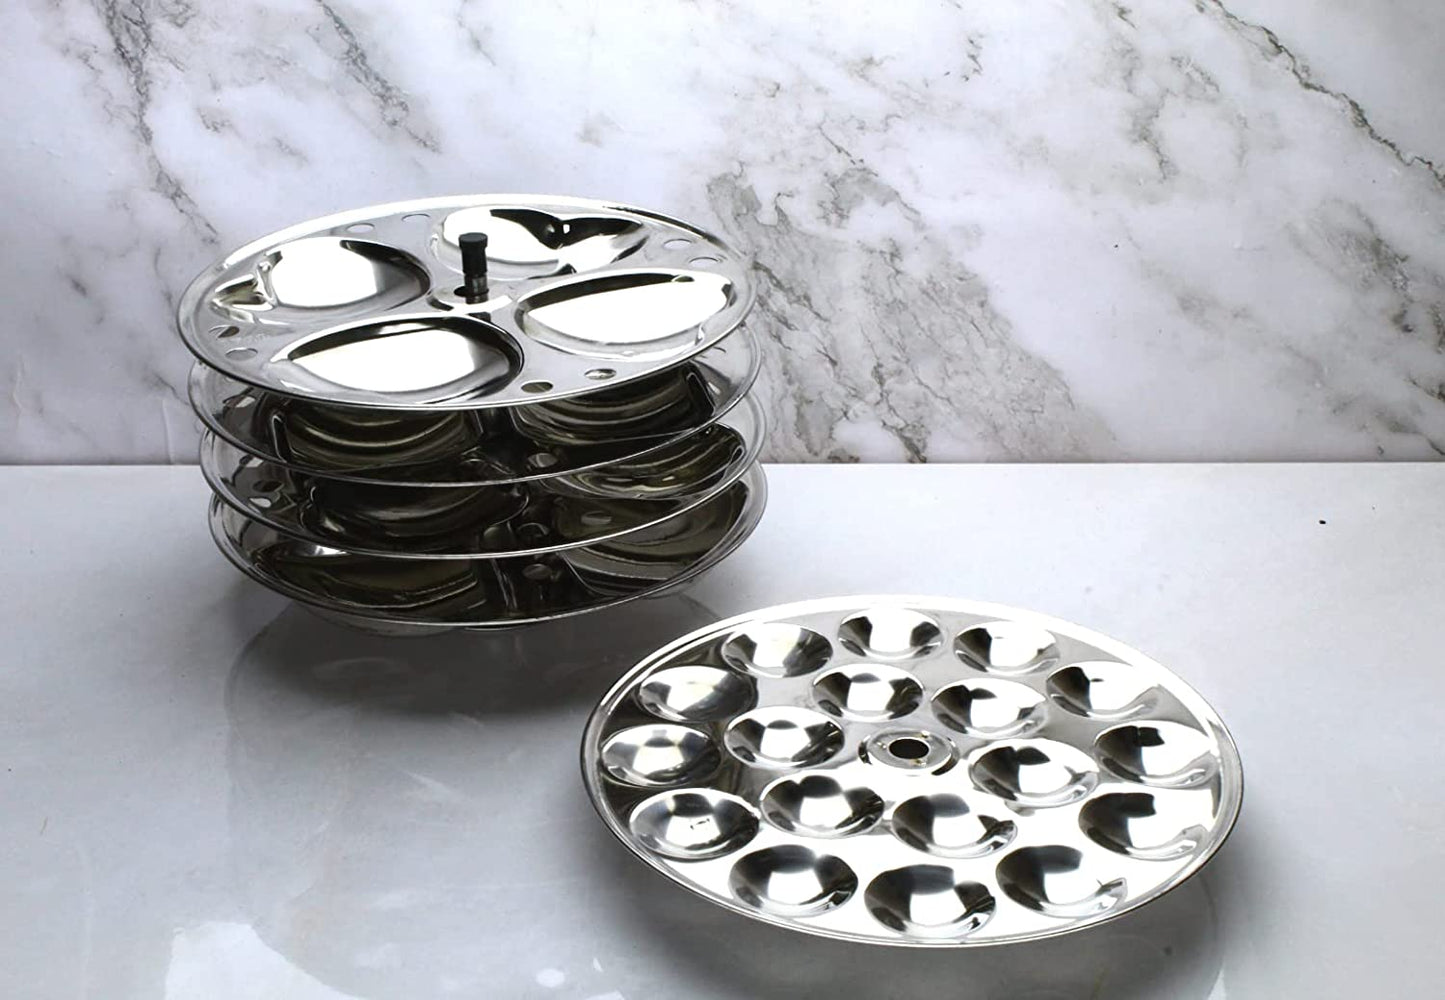 Stainless Steel Different Shapes Idli Plates with Stand 5 Plates